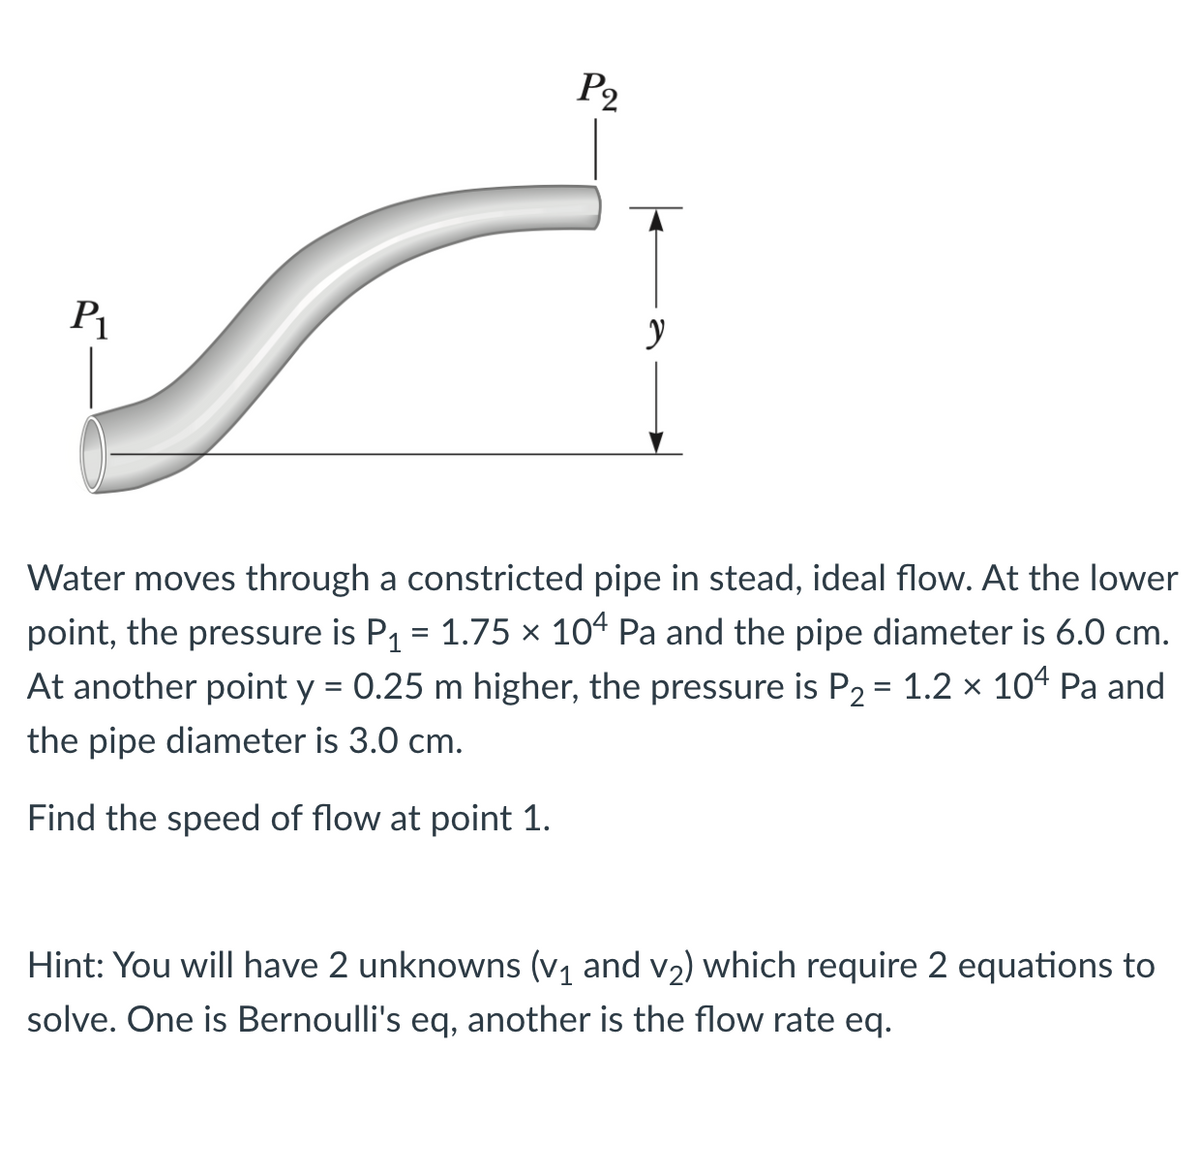 P2
P1
Water moves through a constricted pipe in stead, ideal flow. At the lower
point, the pressure is P1 = 1.75 × 104 Pa and the pipe diameter is 6.0 cm.
At another point y = 0.25 m higher, the pressure is P2 = 1.2 × 104 Pa and
the pipe diameter is 3.0 cm.
Find the speed of flow at point 1.
Hint: You will have 2 unknowns (v1 and v2) which require 2 equations to
solve. One is Bernoulli's eq, another is the flow rate eq.
